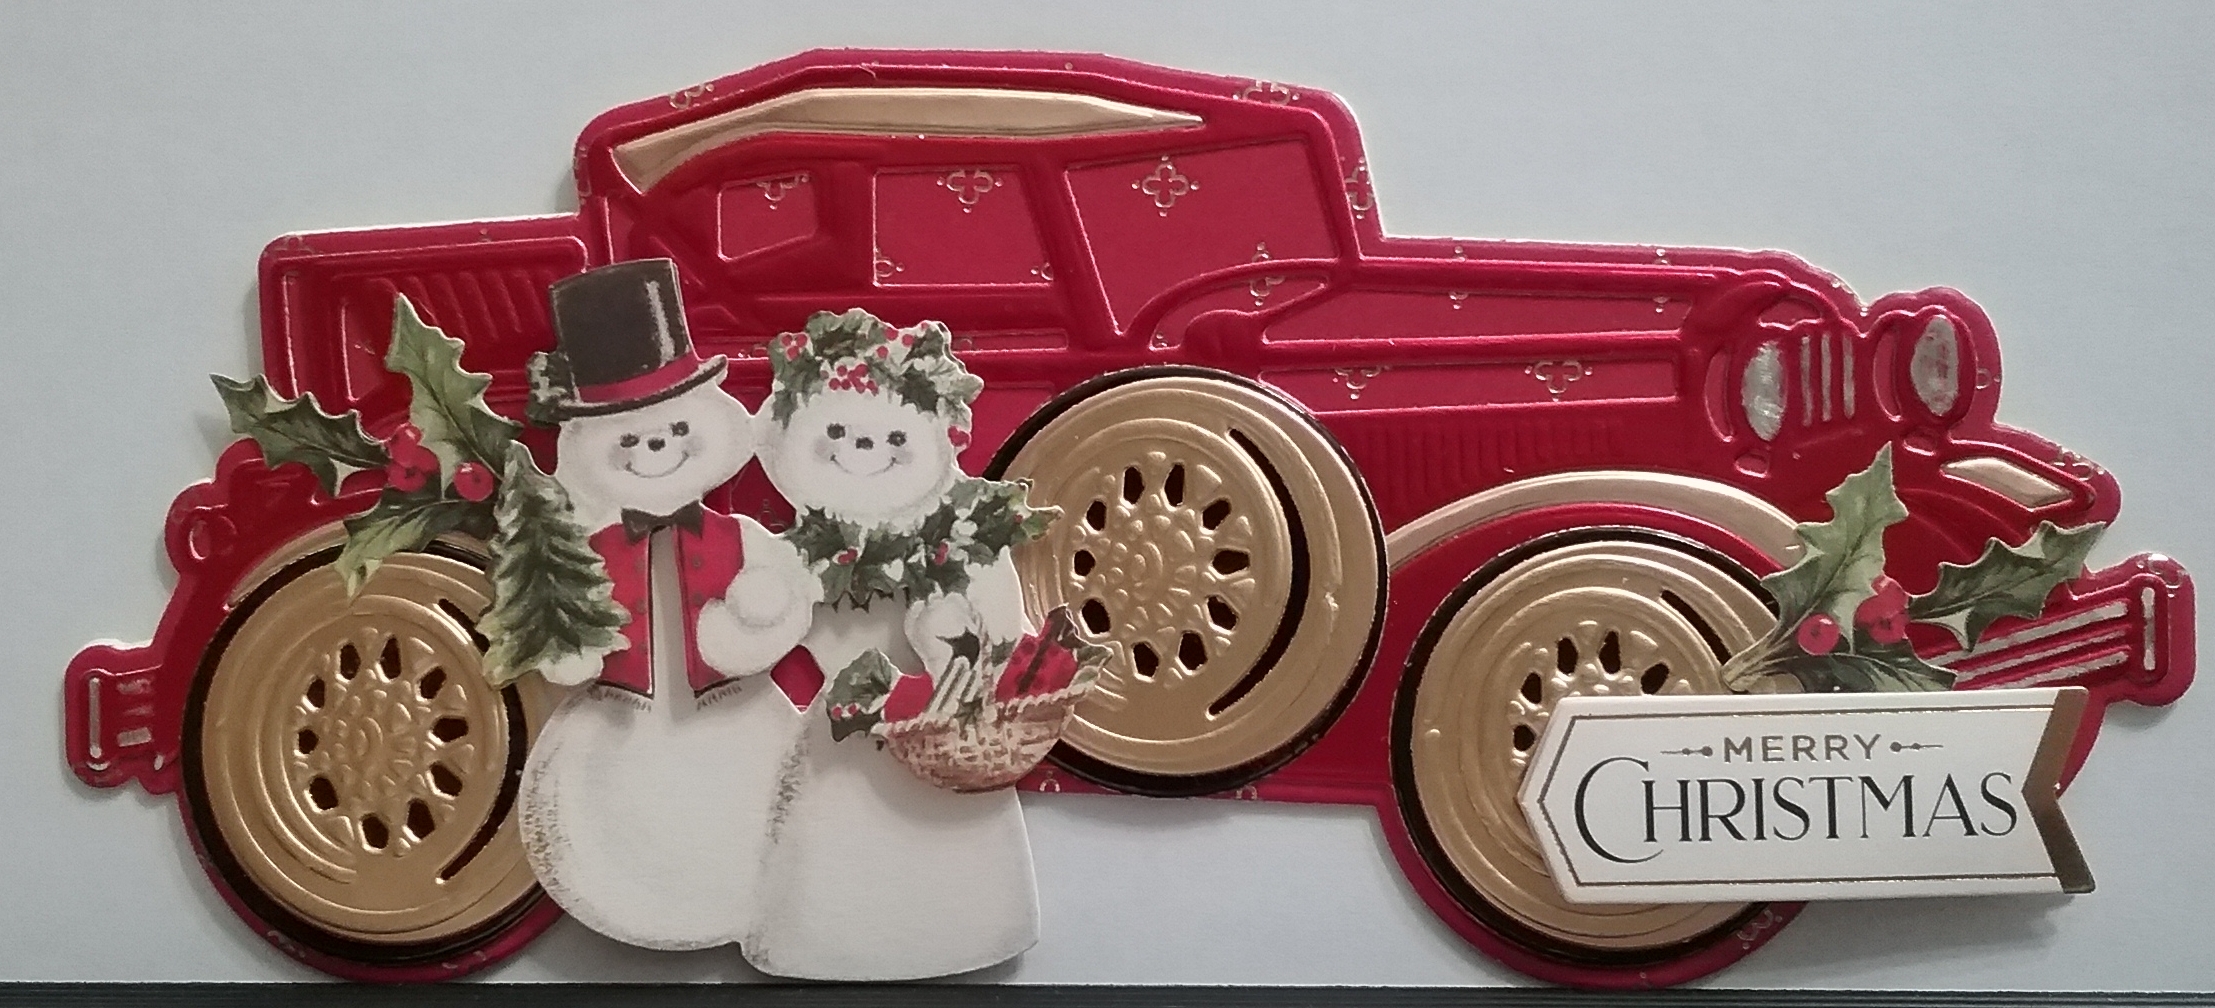 A christmas card with a snowman and a truck.